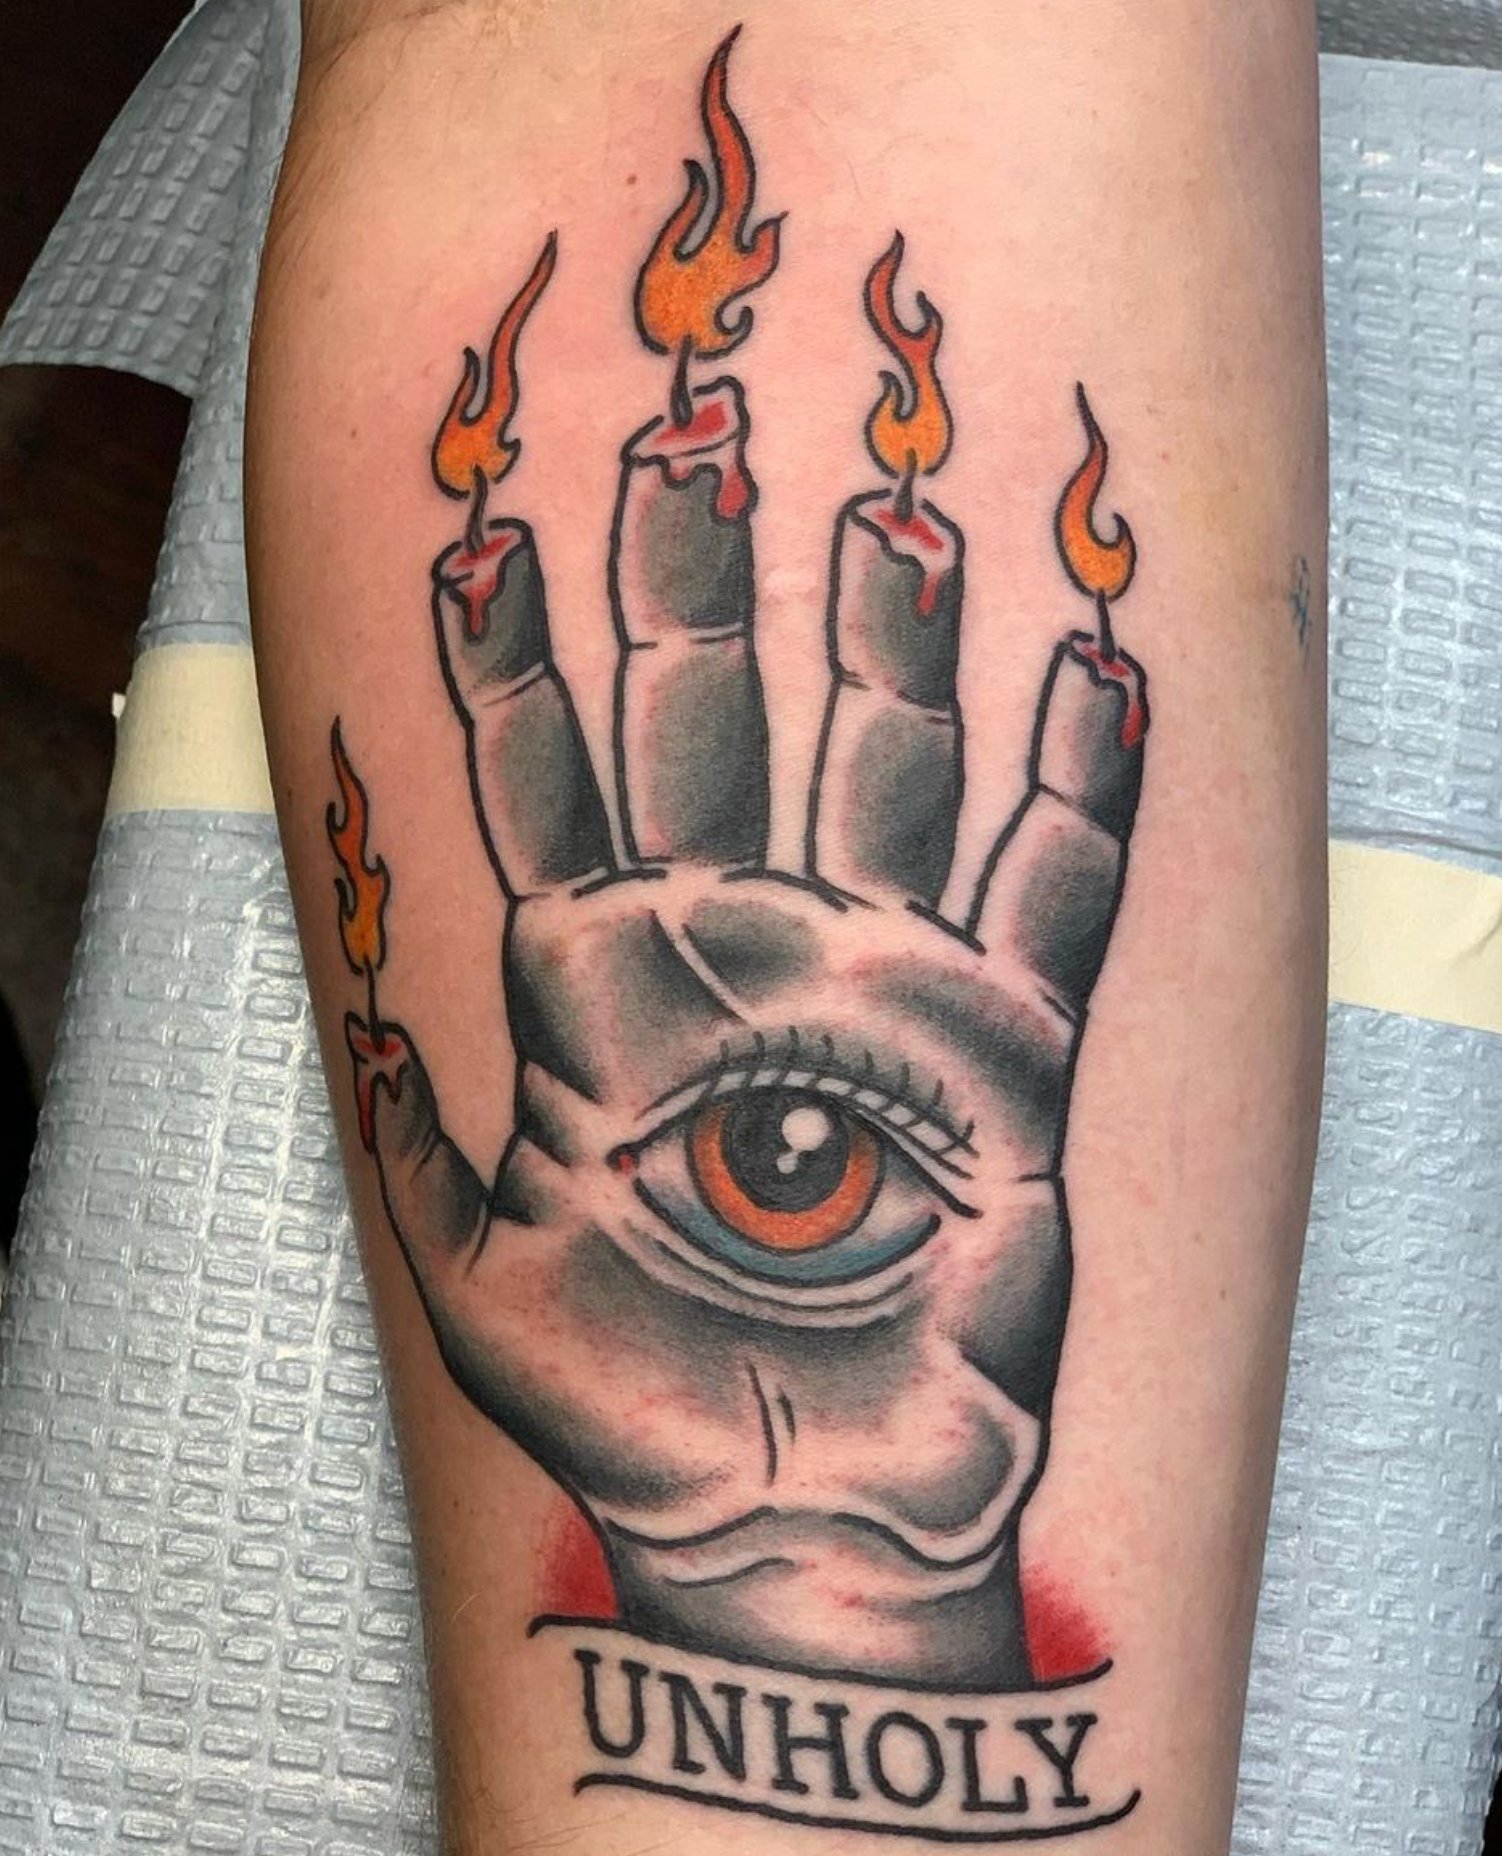 11 Hand Of Glory Tattoo Ideas That Will Blow Your Mind  alexie